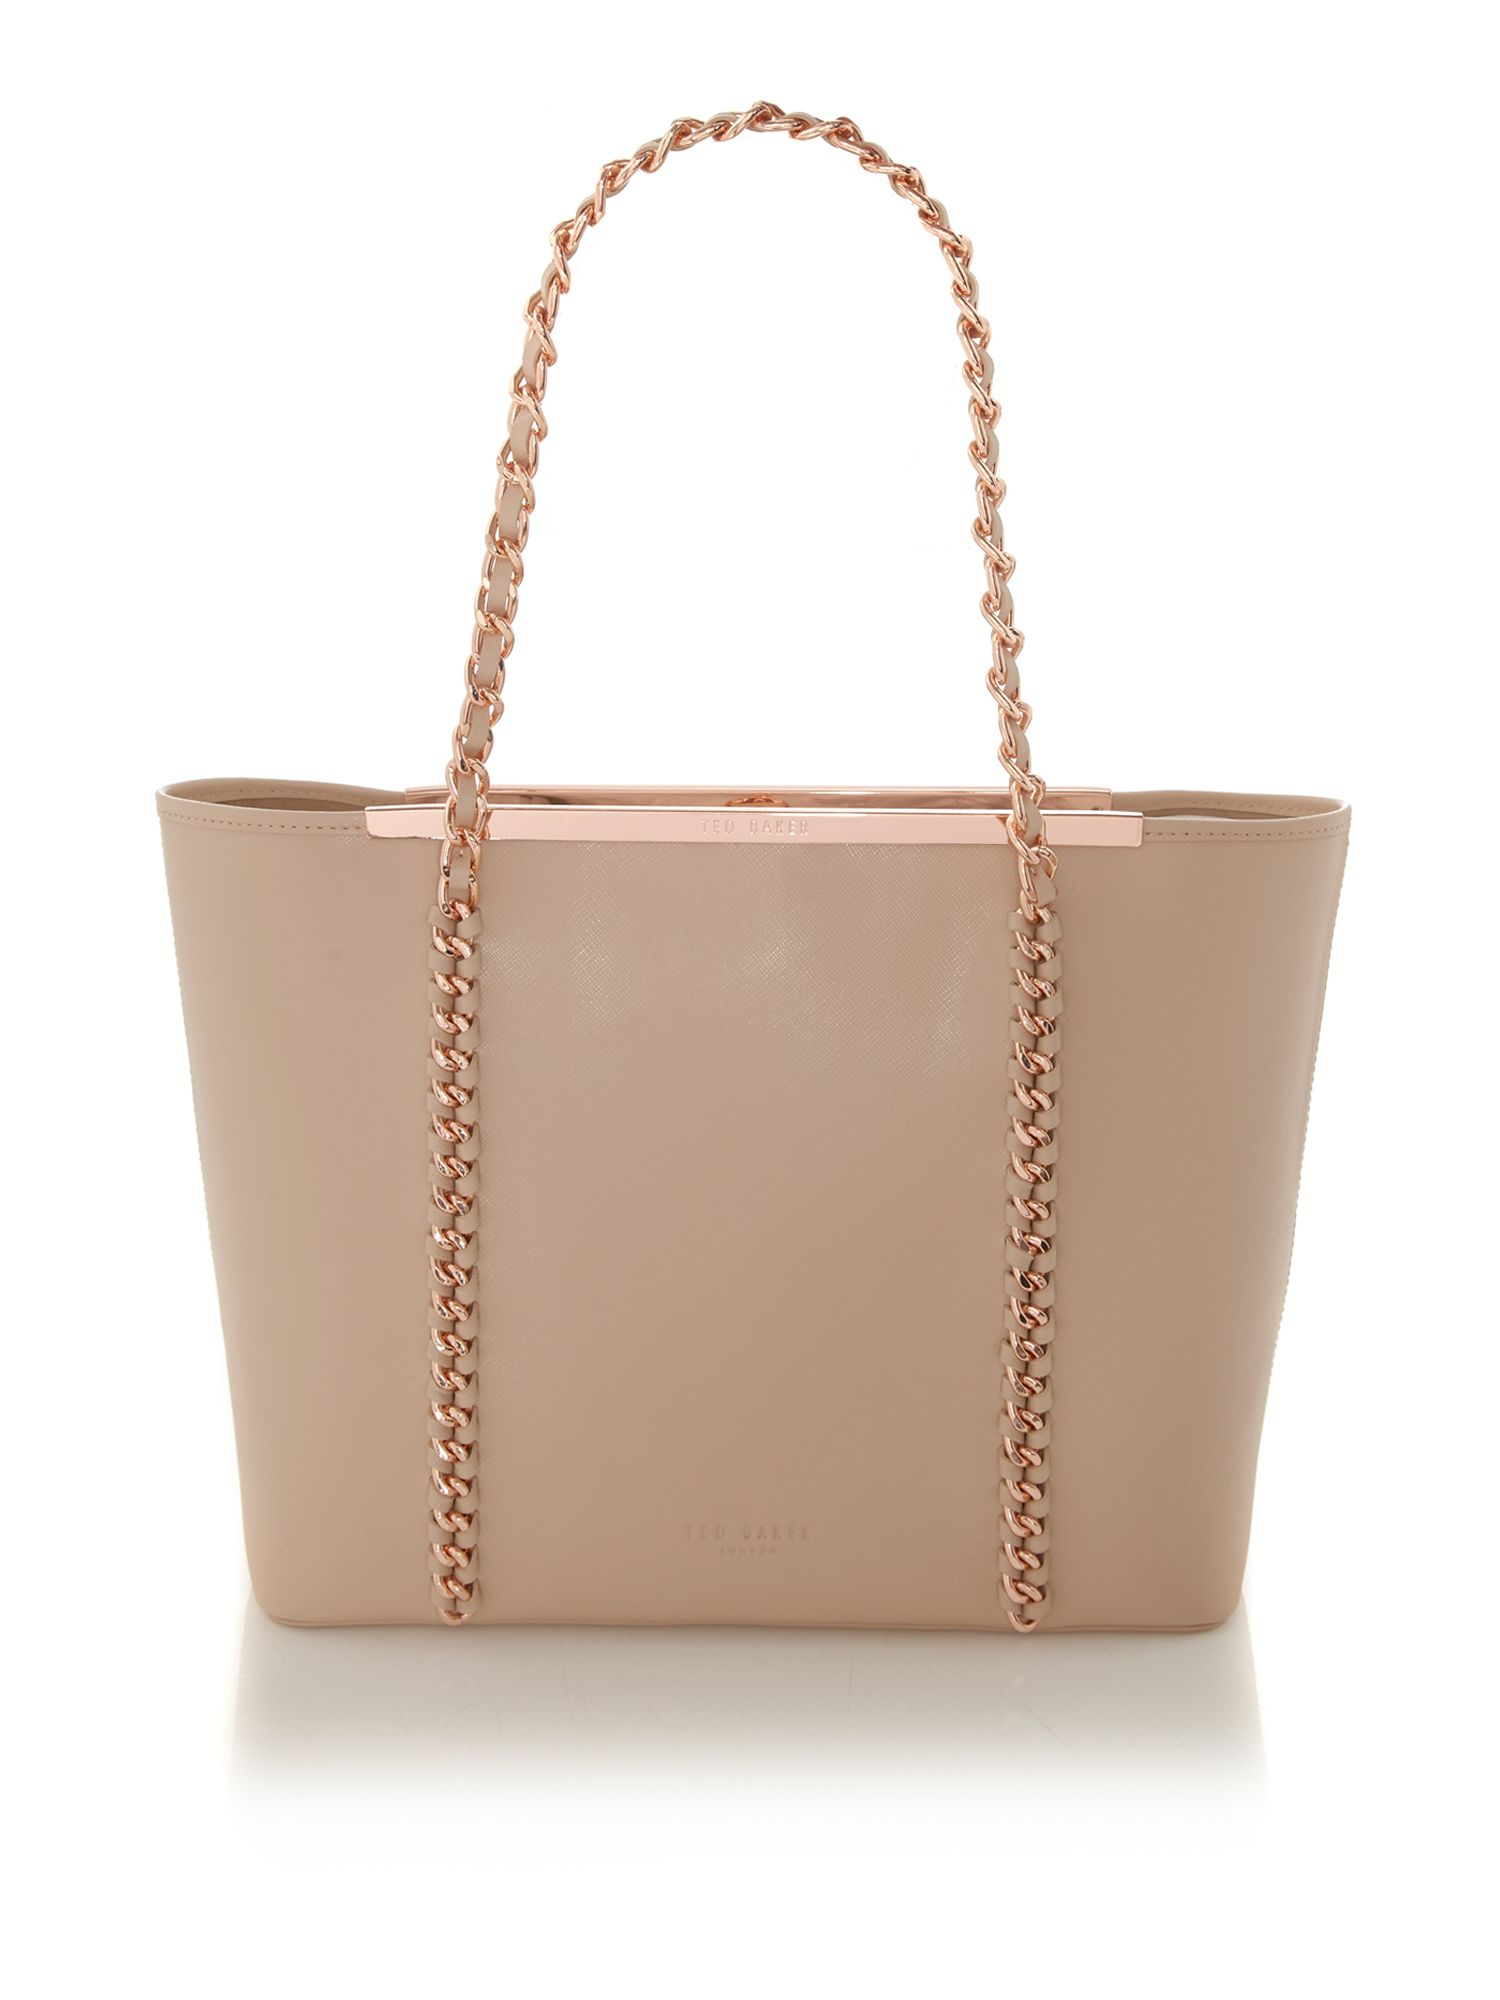 Ted baker Taupe Chain Zip Purse Tote Bag in Brown (Taupe) | Lyst